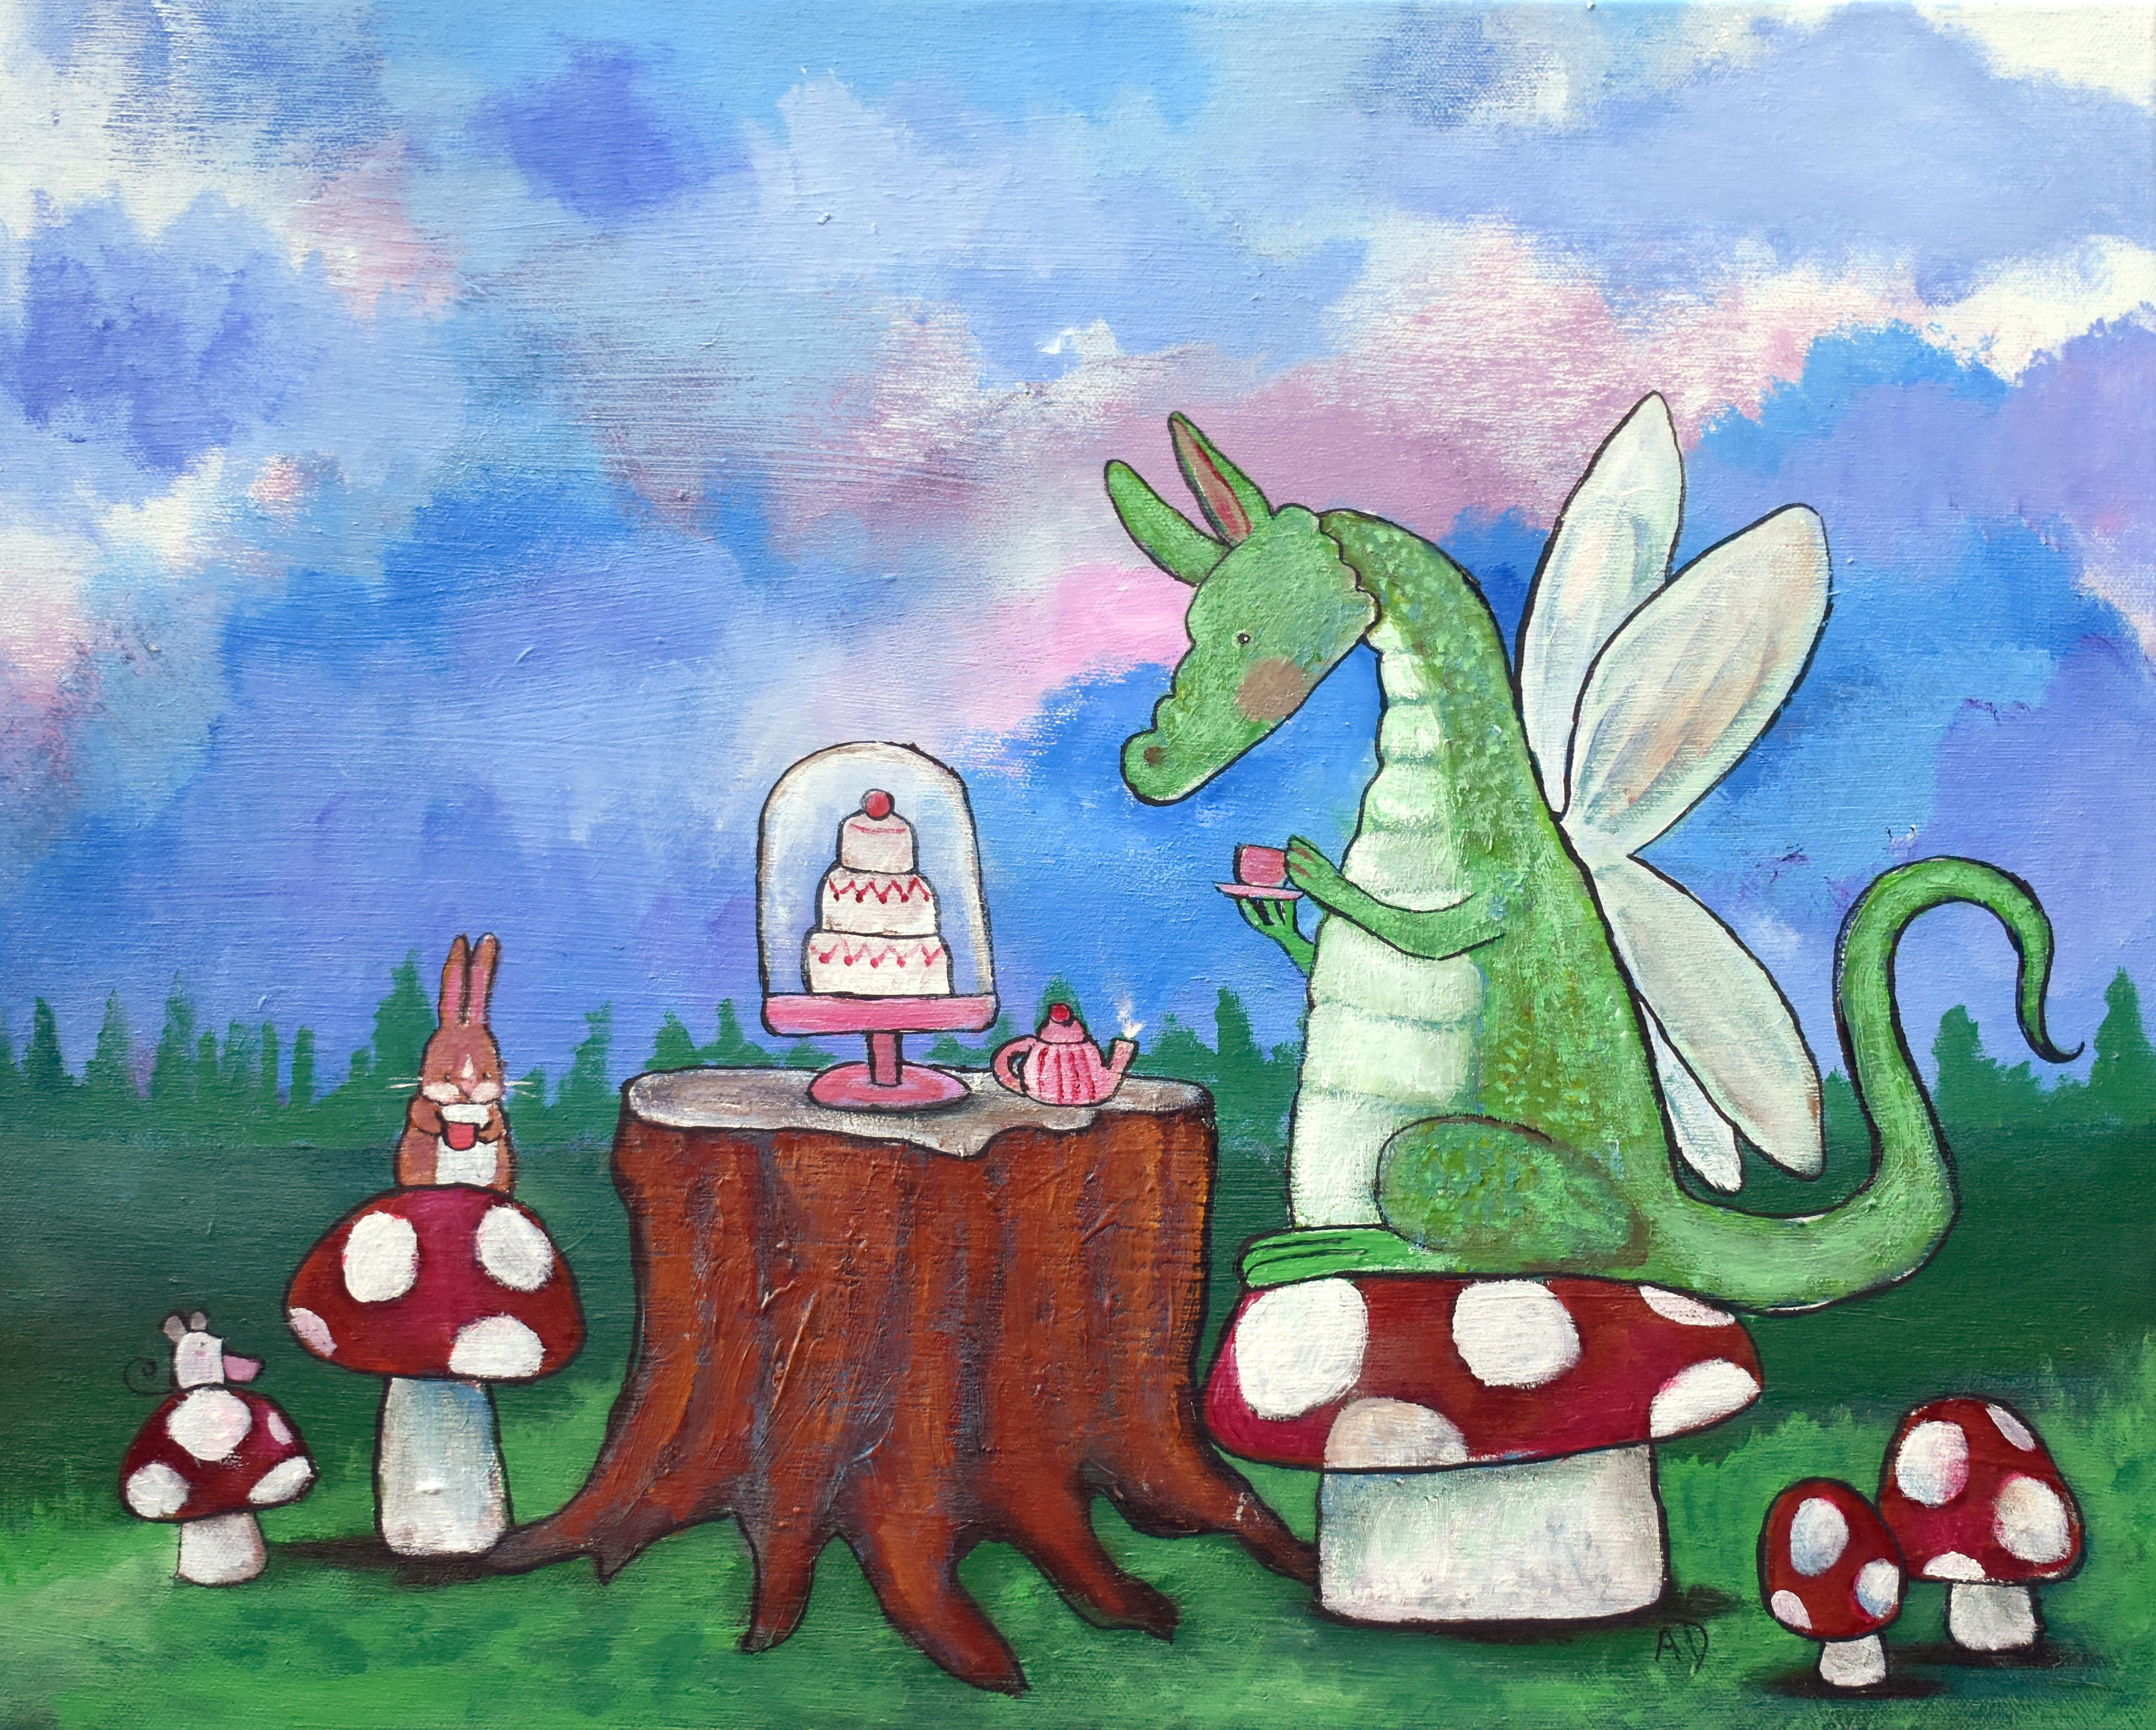 A Whimsical Tea Party, Original Painting